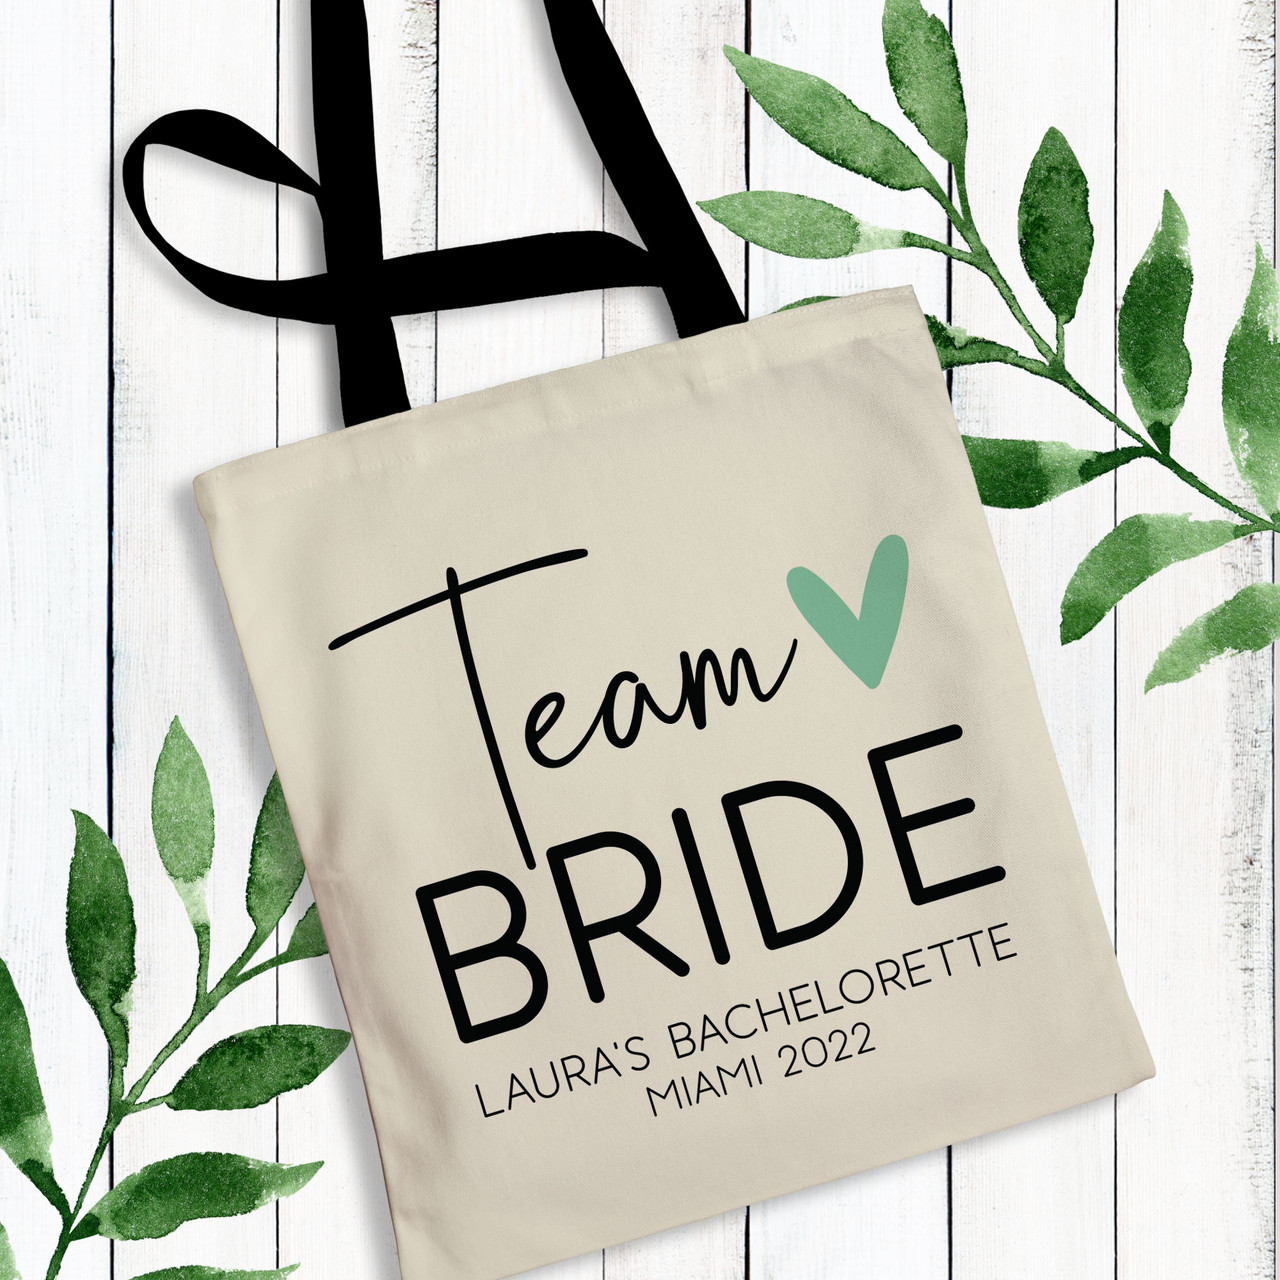 Personalized Name Tote Bags for Women - 17 Color Options - Customized  Cotton Canvas Shoulder Bag - Custom Bridesmaid Proposal Gifts -  Customizable